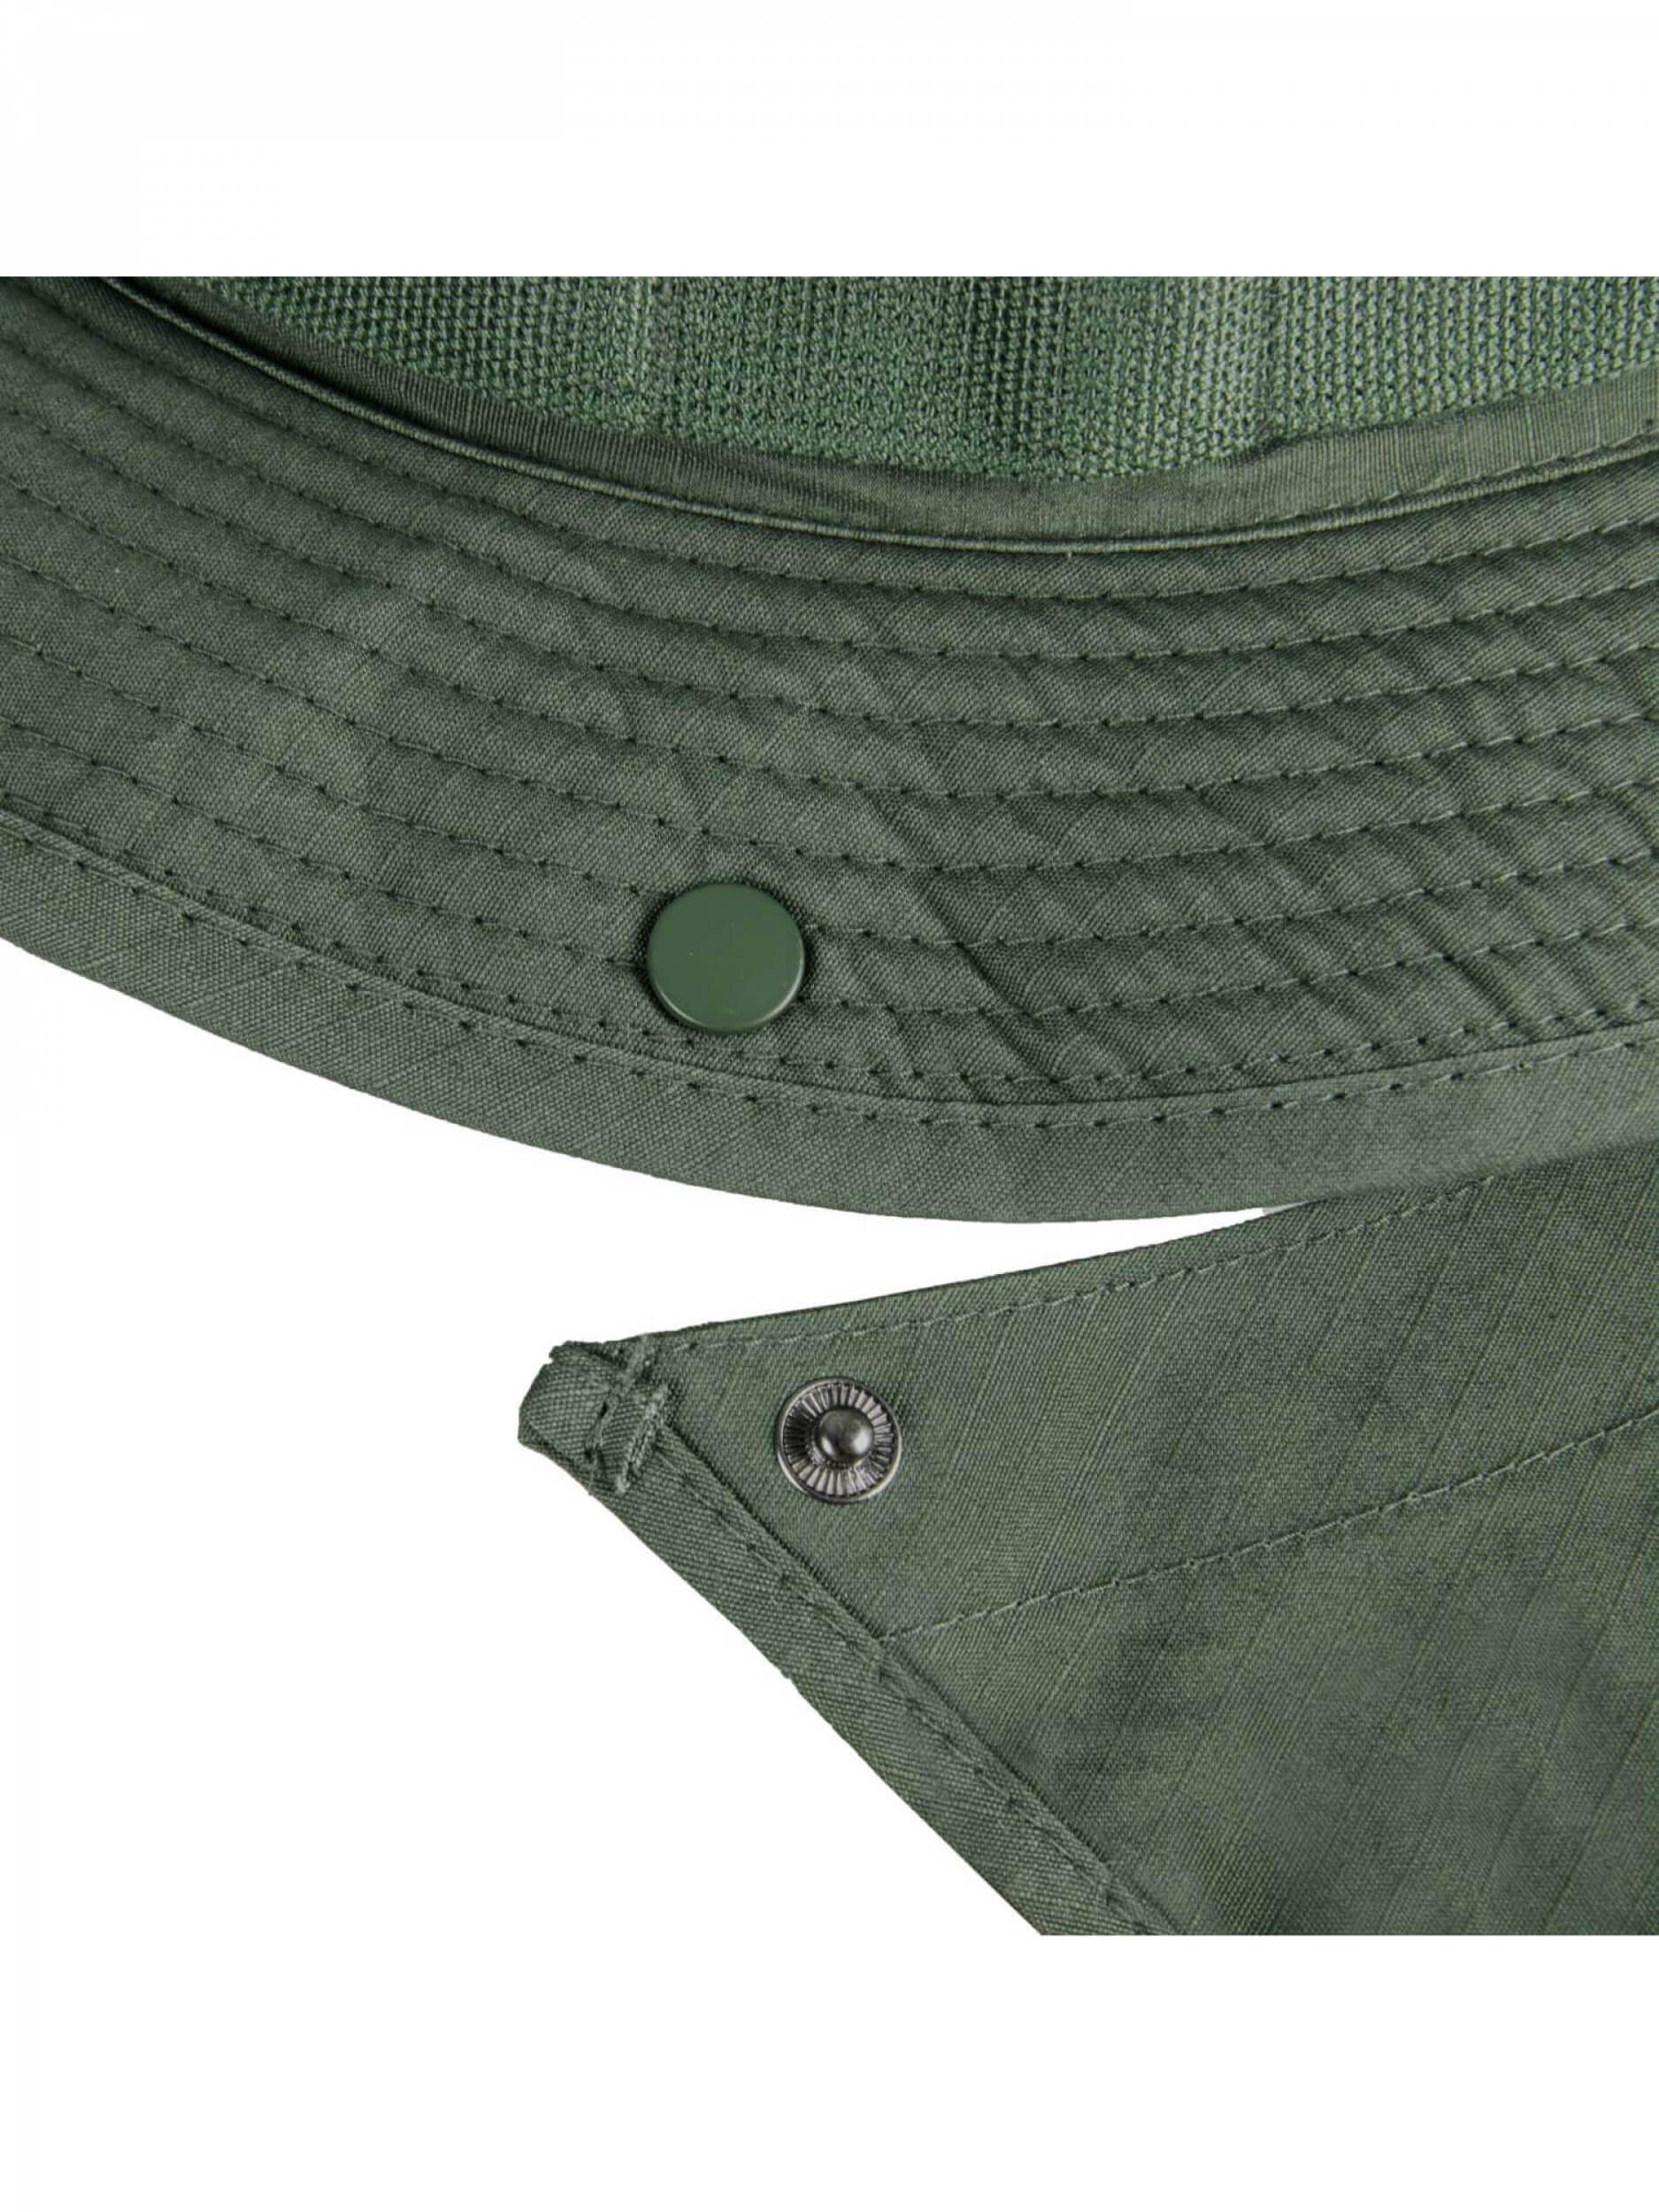 Helikon-Tex Boonie Hat Ripstop Olive Green